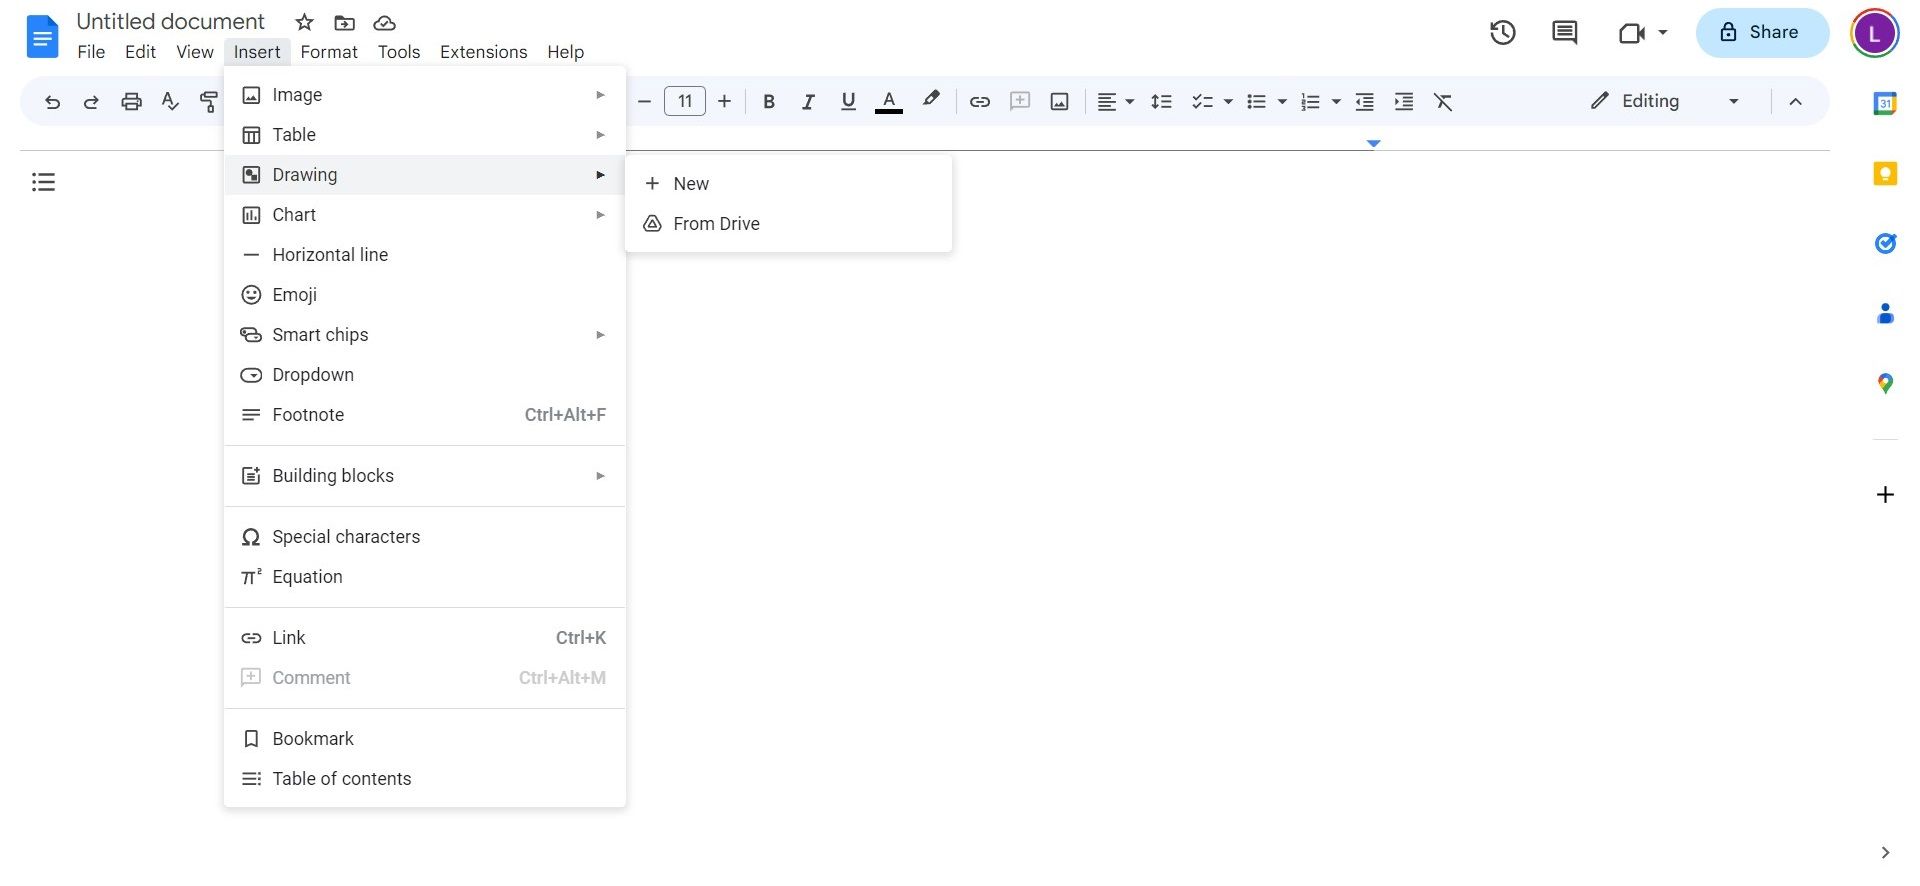 Screenshot shows the 'Drawing' and 'New' options in the insert drop down in Google Docs.